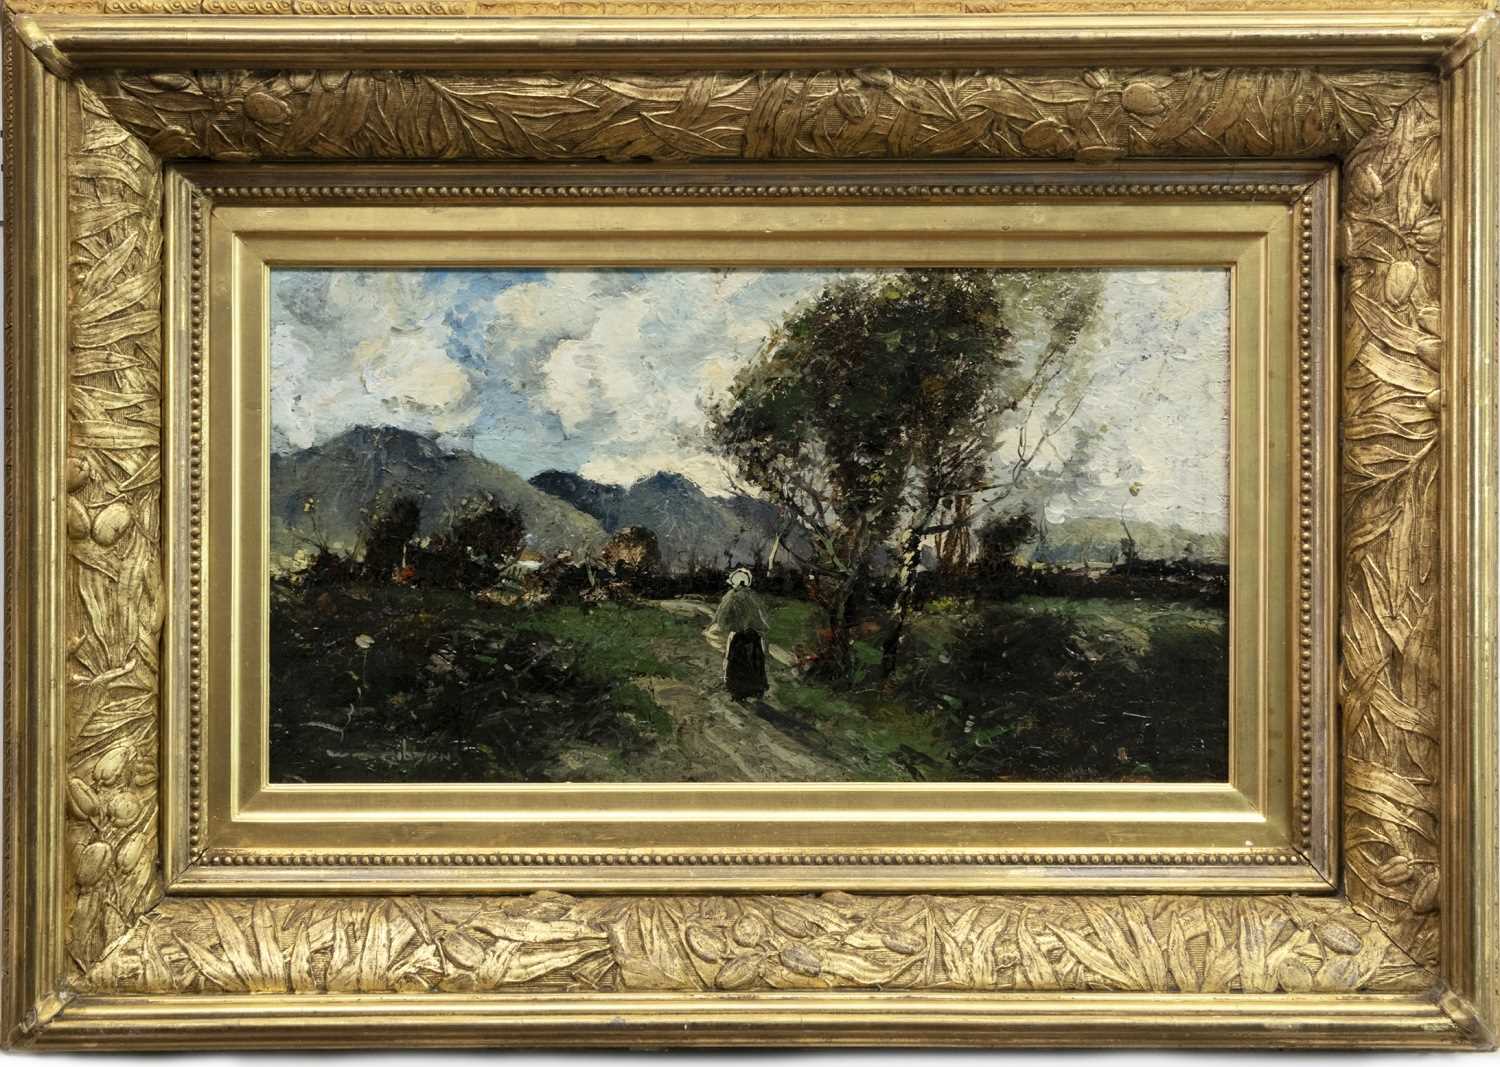 Lot 73 - FIGURE ON A WOODLAND PATH, AN OIL BY WILLIAM ALFRED GIBSON